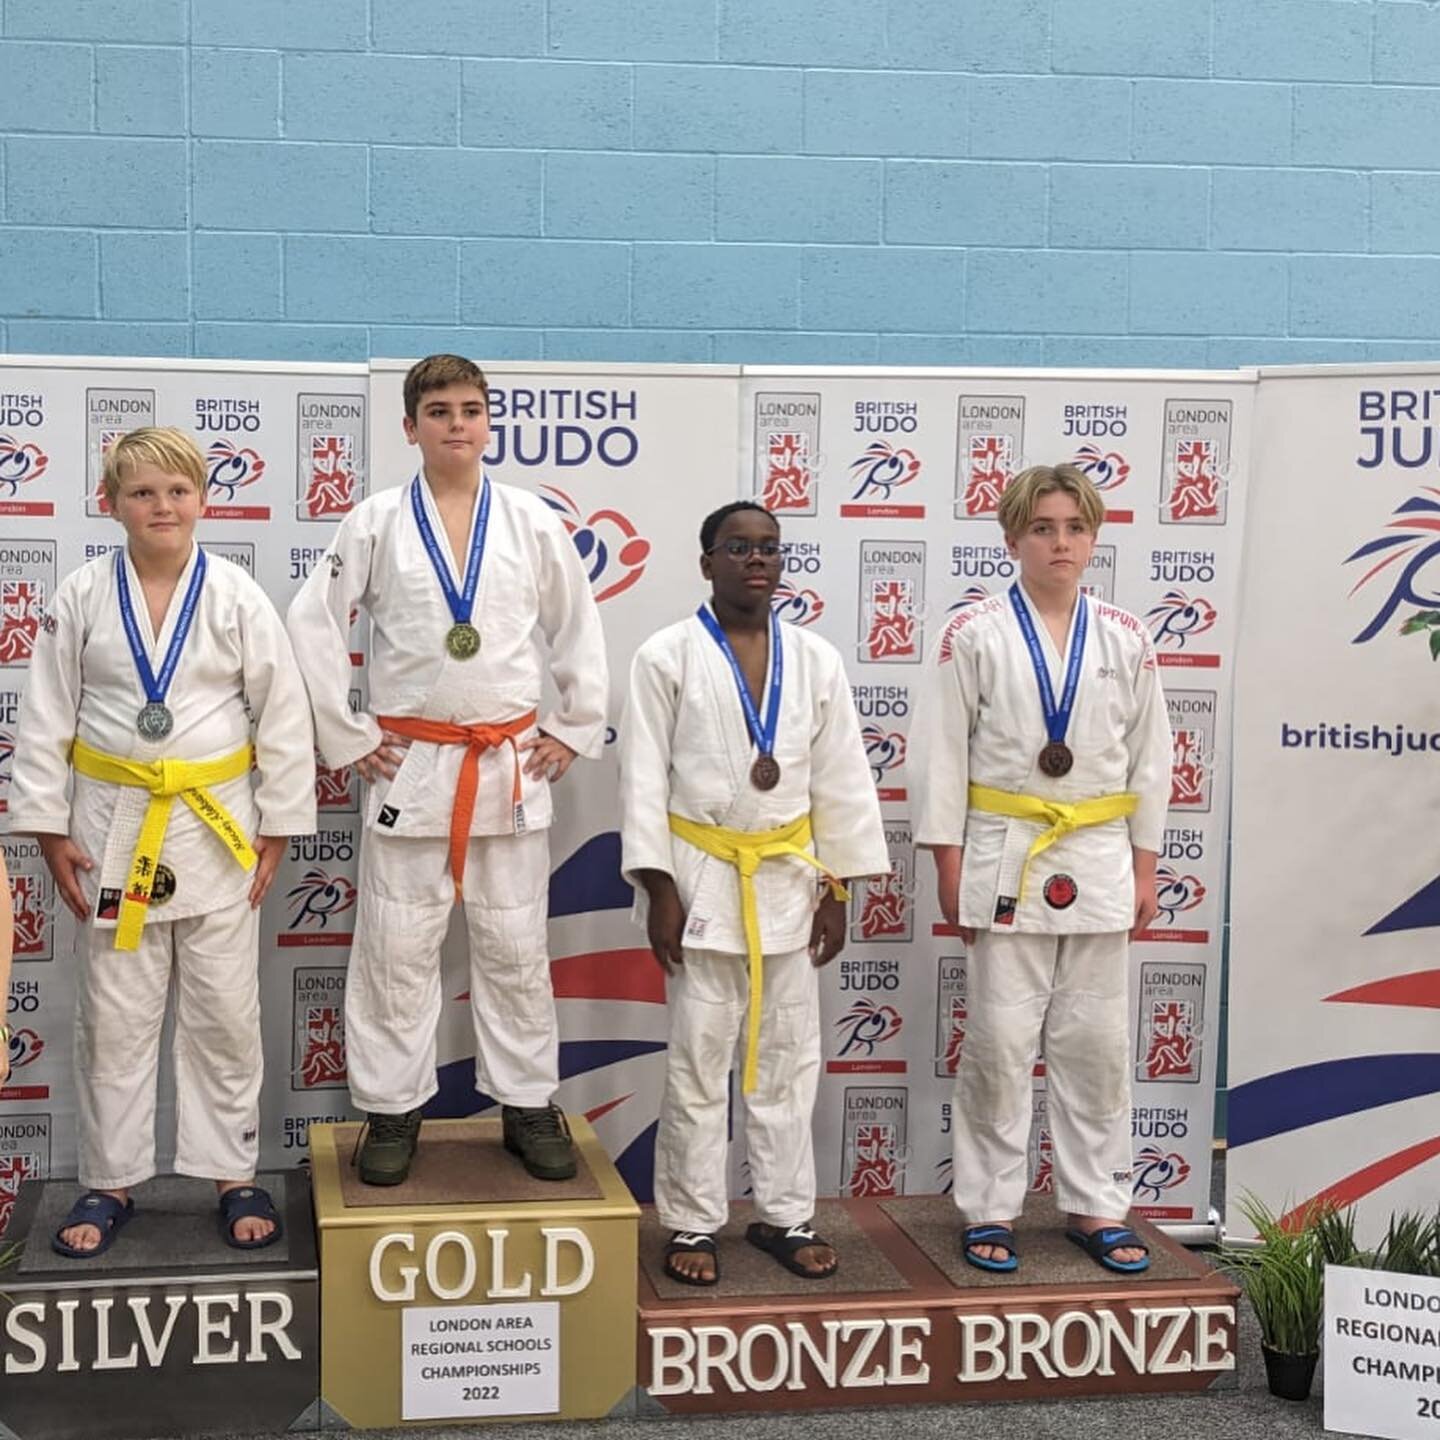 Tough day today at the British Schools championships! 

Noah 🥉, Simion 🥉, Taslima &amp; Mustafa unplaced. Super proud of all the kids. It&rsquo;s the first big competition for my kids! Many more to come I&rsquo;m sure ❤️💪🏻🥋🎉

#judo #judocompeti